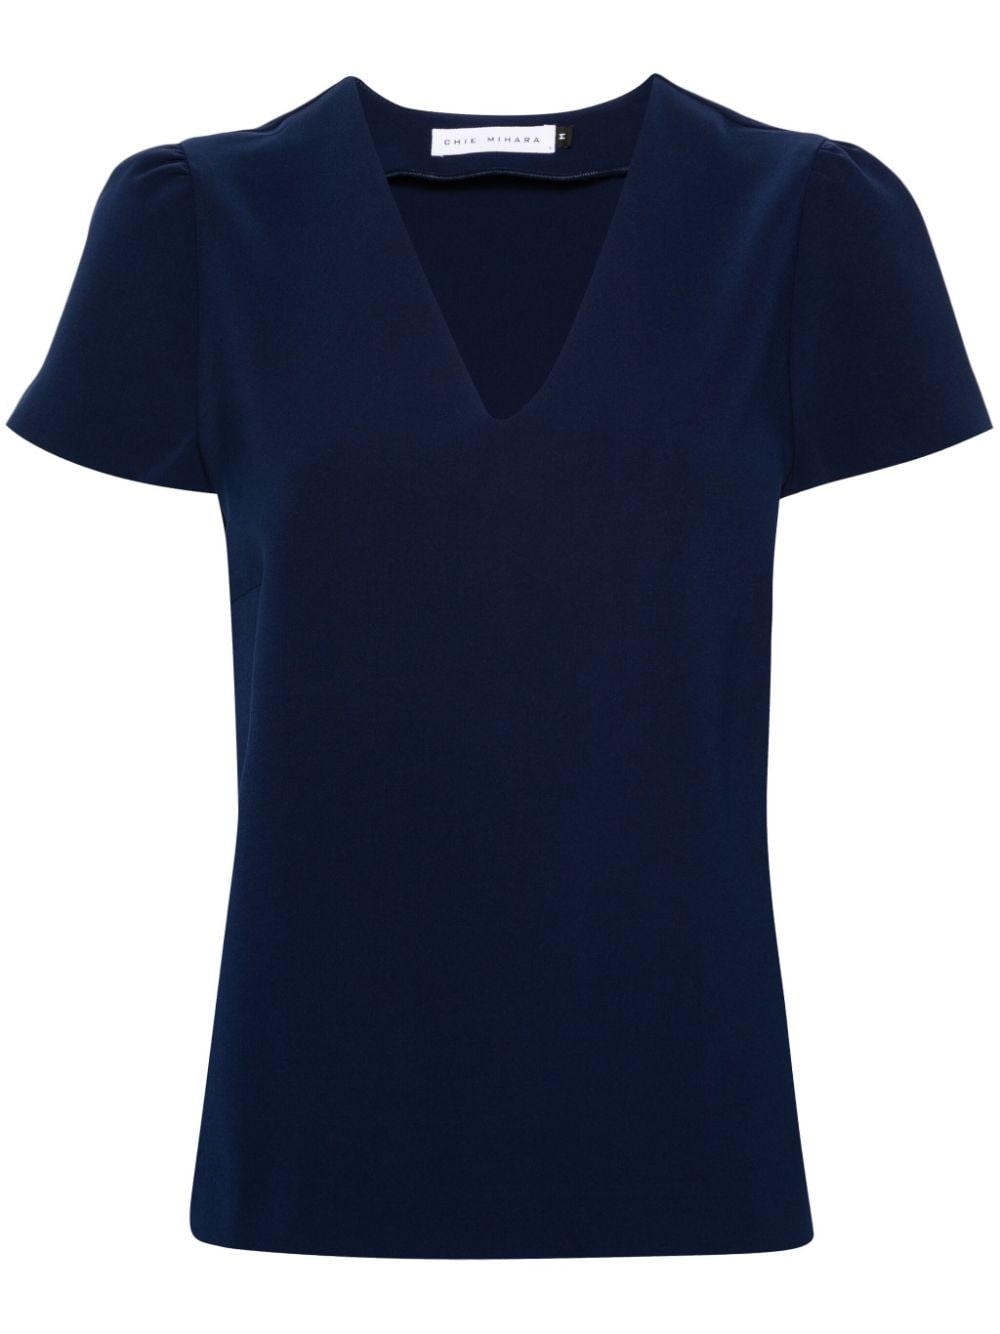 Chie Mihara Londres Cap-sleeves T-shirt In Blue